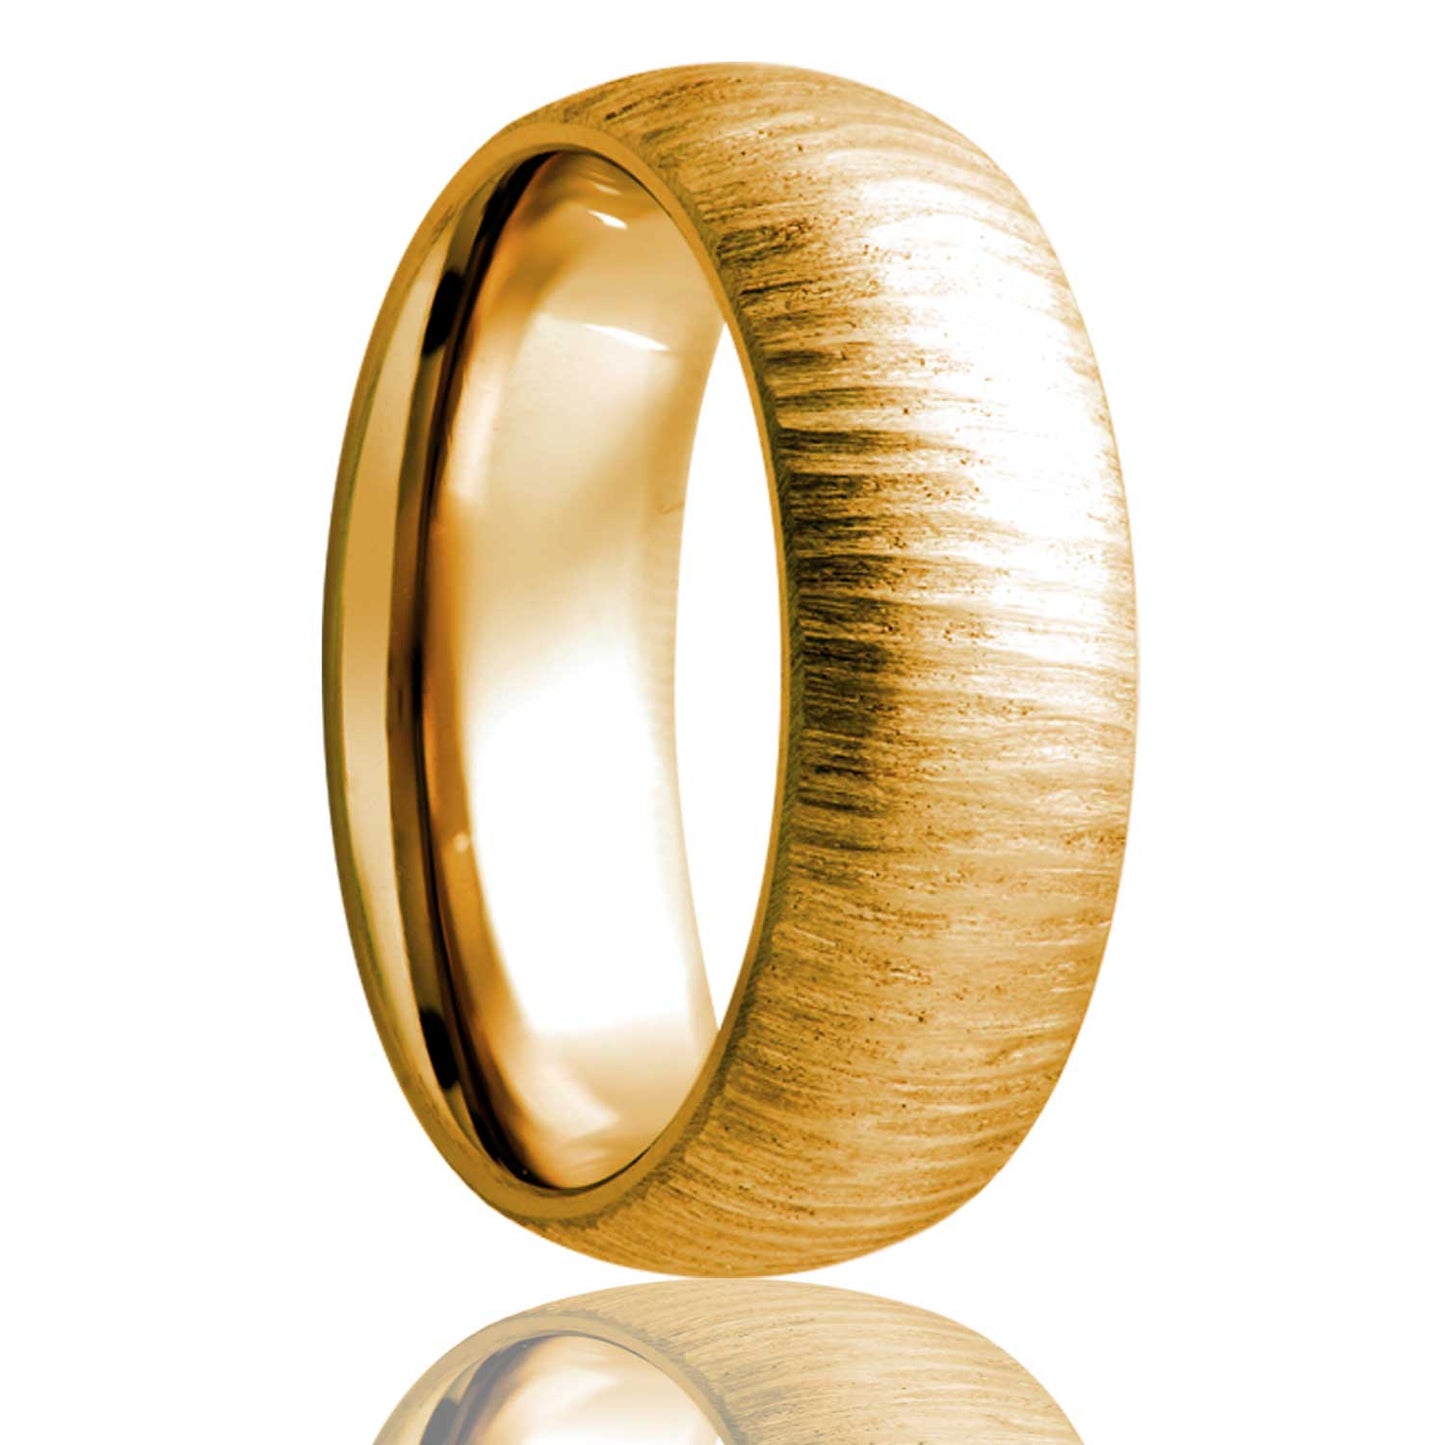 A treebark domed 10k gold wedding band displayed on a neutral white background.